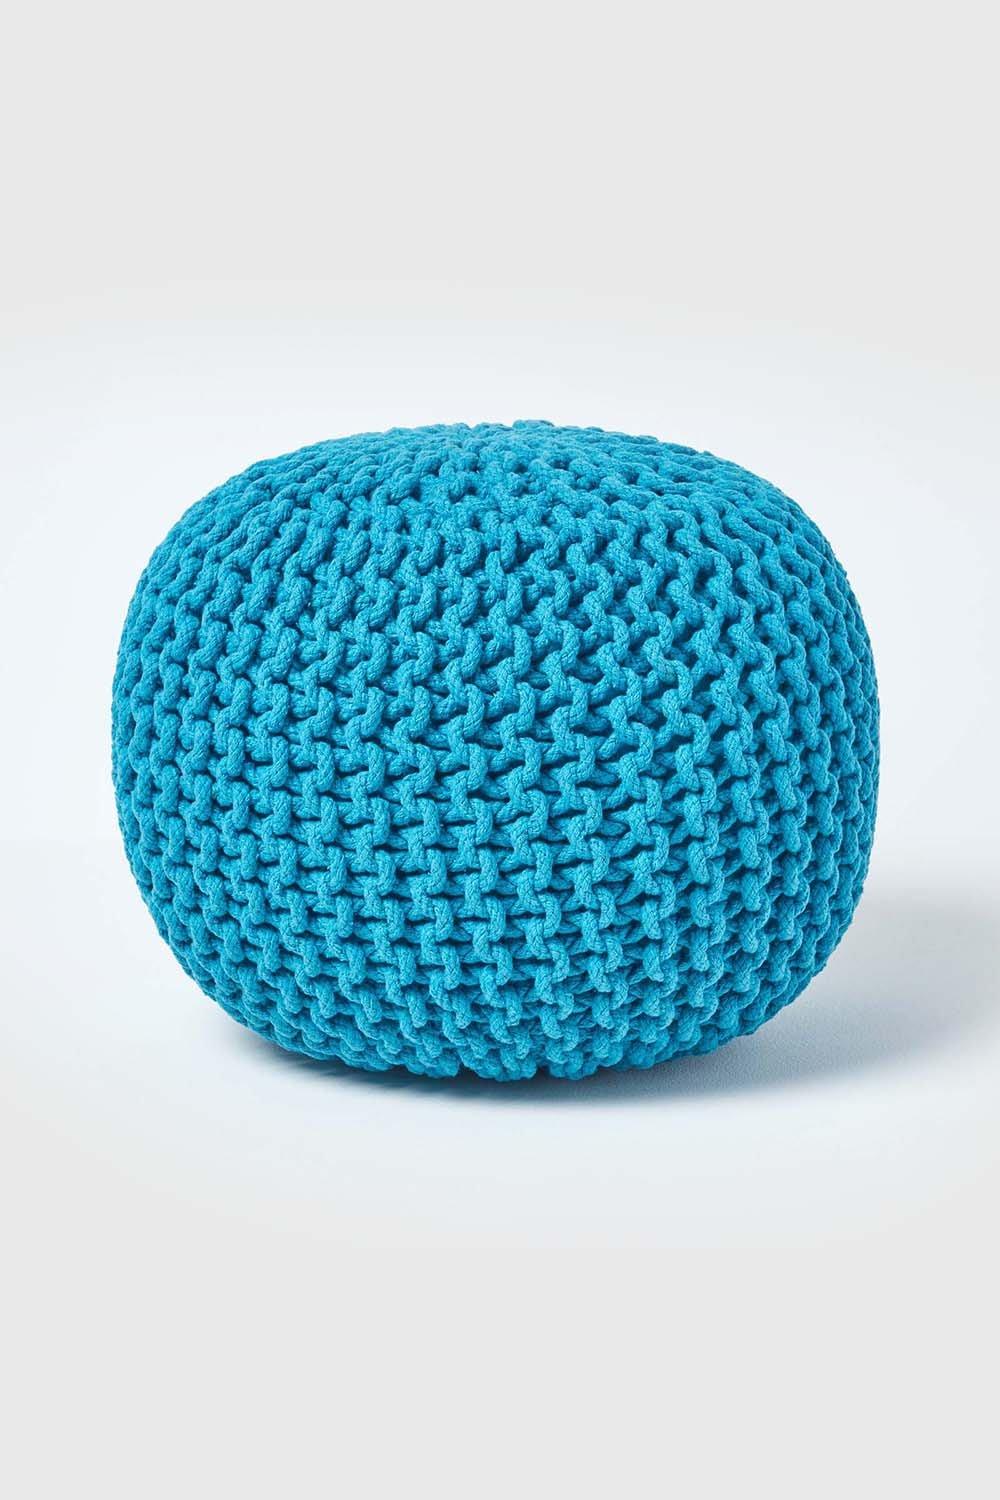 Homescapes Round Cotton Knitted Pouffe Footstool|teal